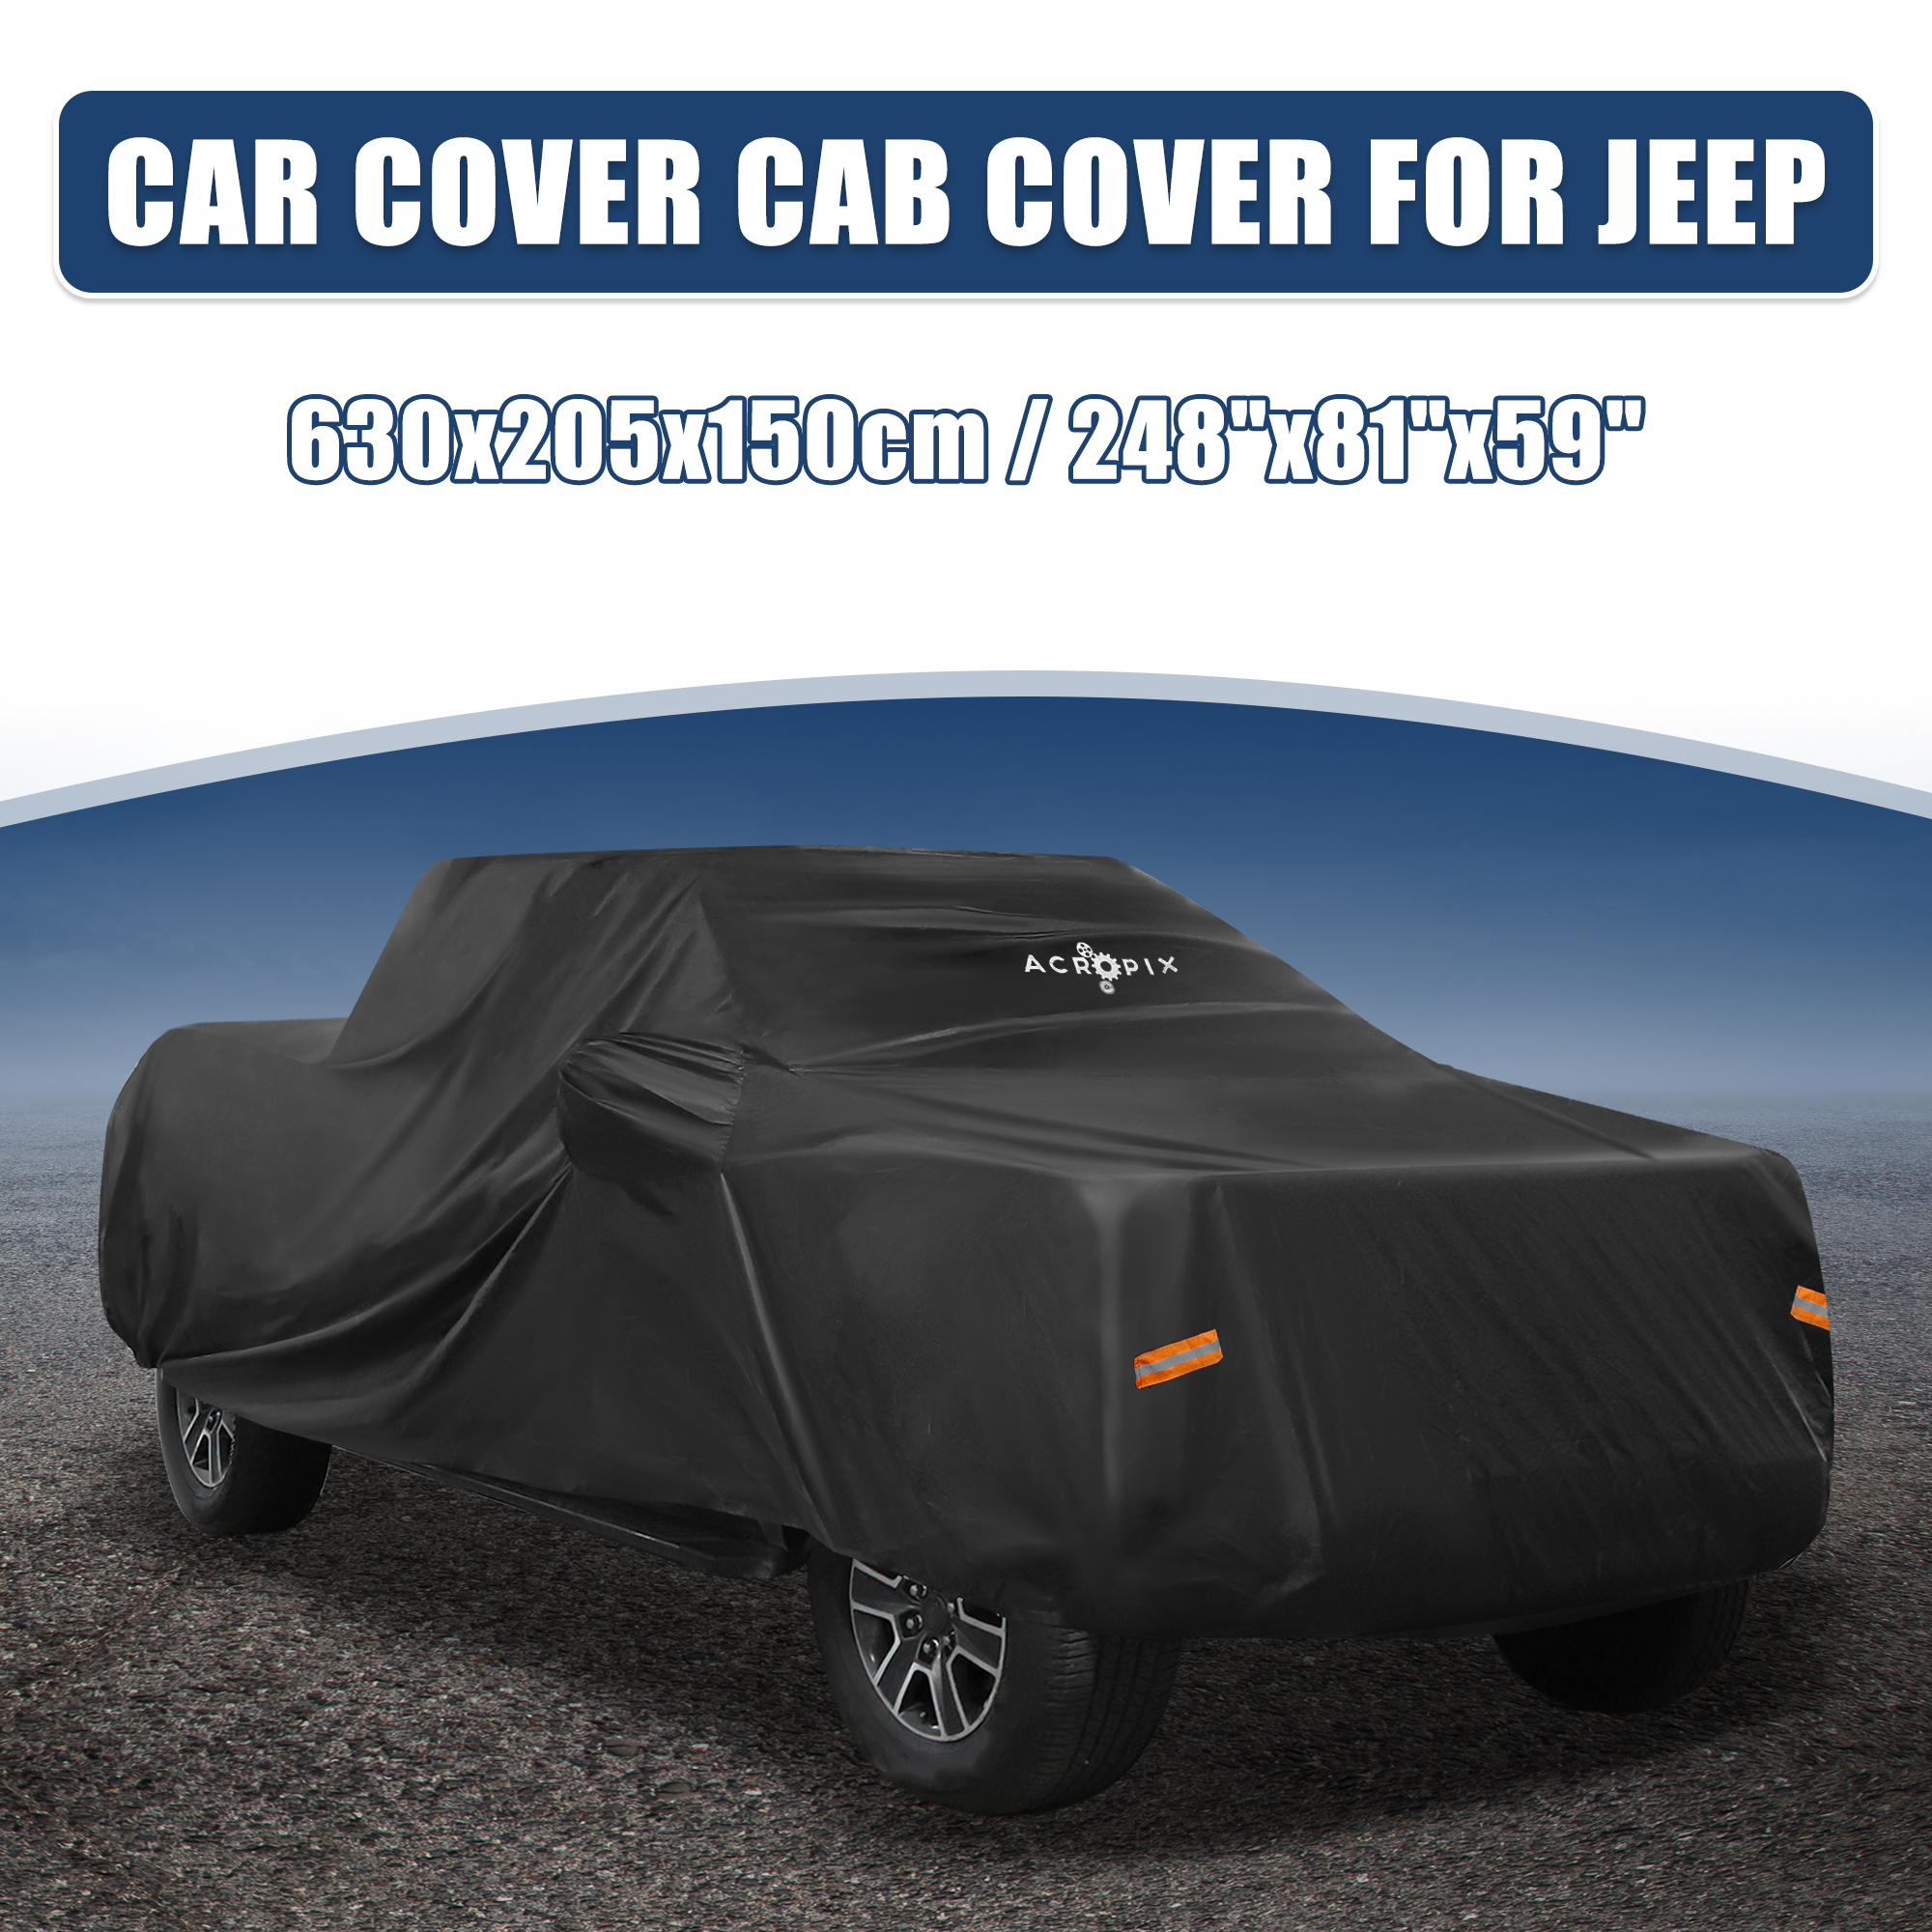 Unique Bargains Pickup Truck Car Cover Fit for Ford F150 Crew Cab 6.5ft Bed Pickup 4 Door 2004-2021 Black